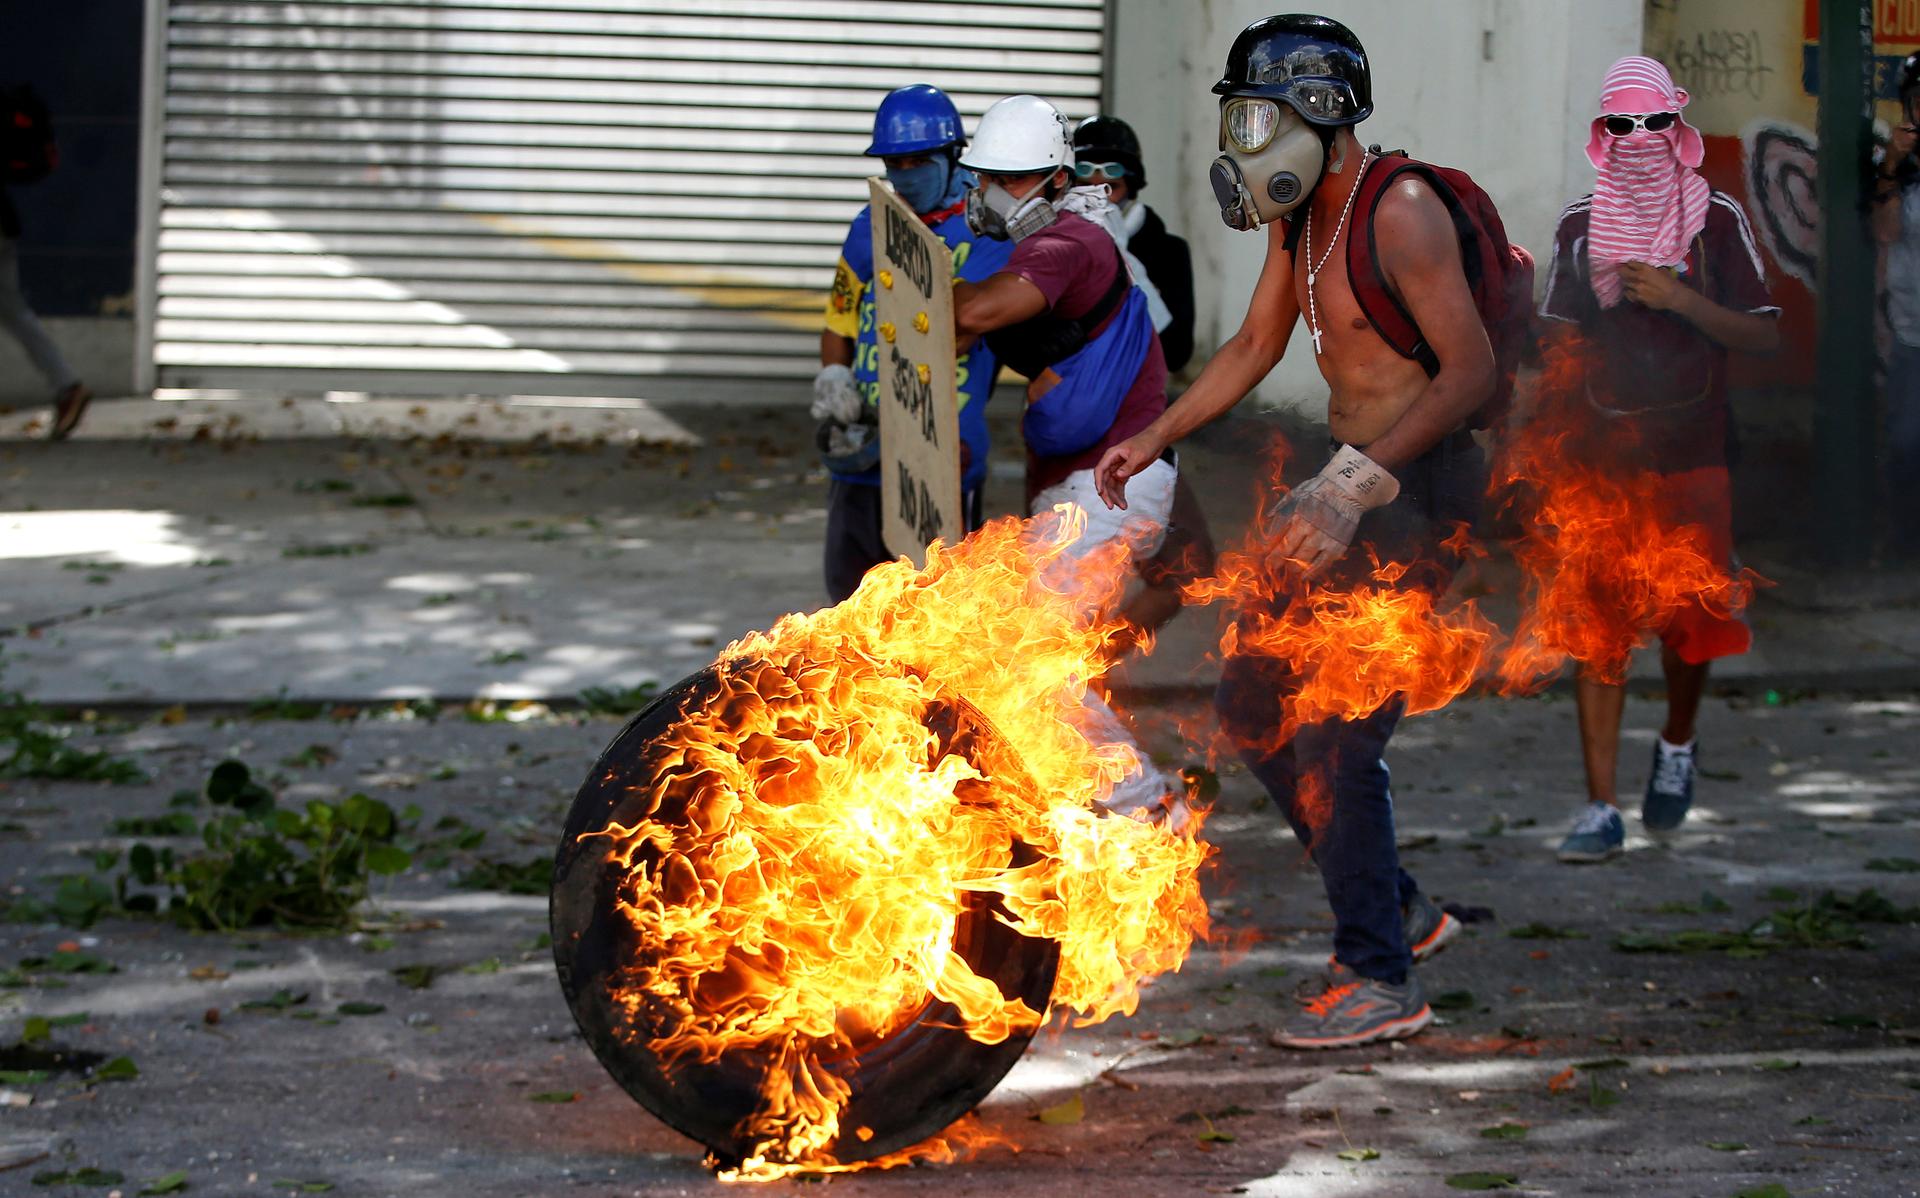 Demonstrators rally during a strike called to protest against Venezuelan President Nicolás Maduro's government in Caracas, Venezuela, July 26, 2017.